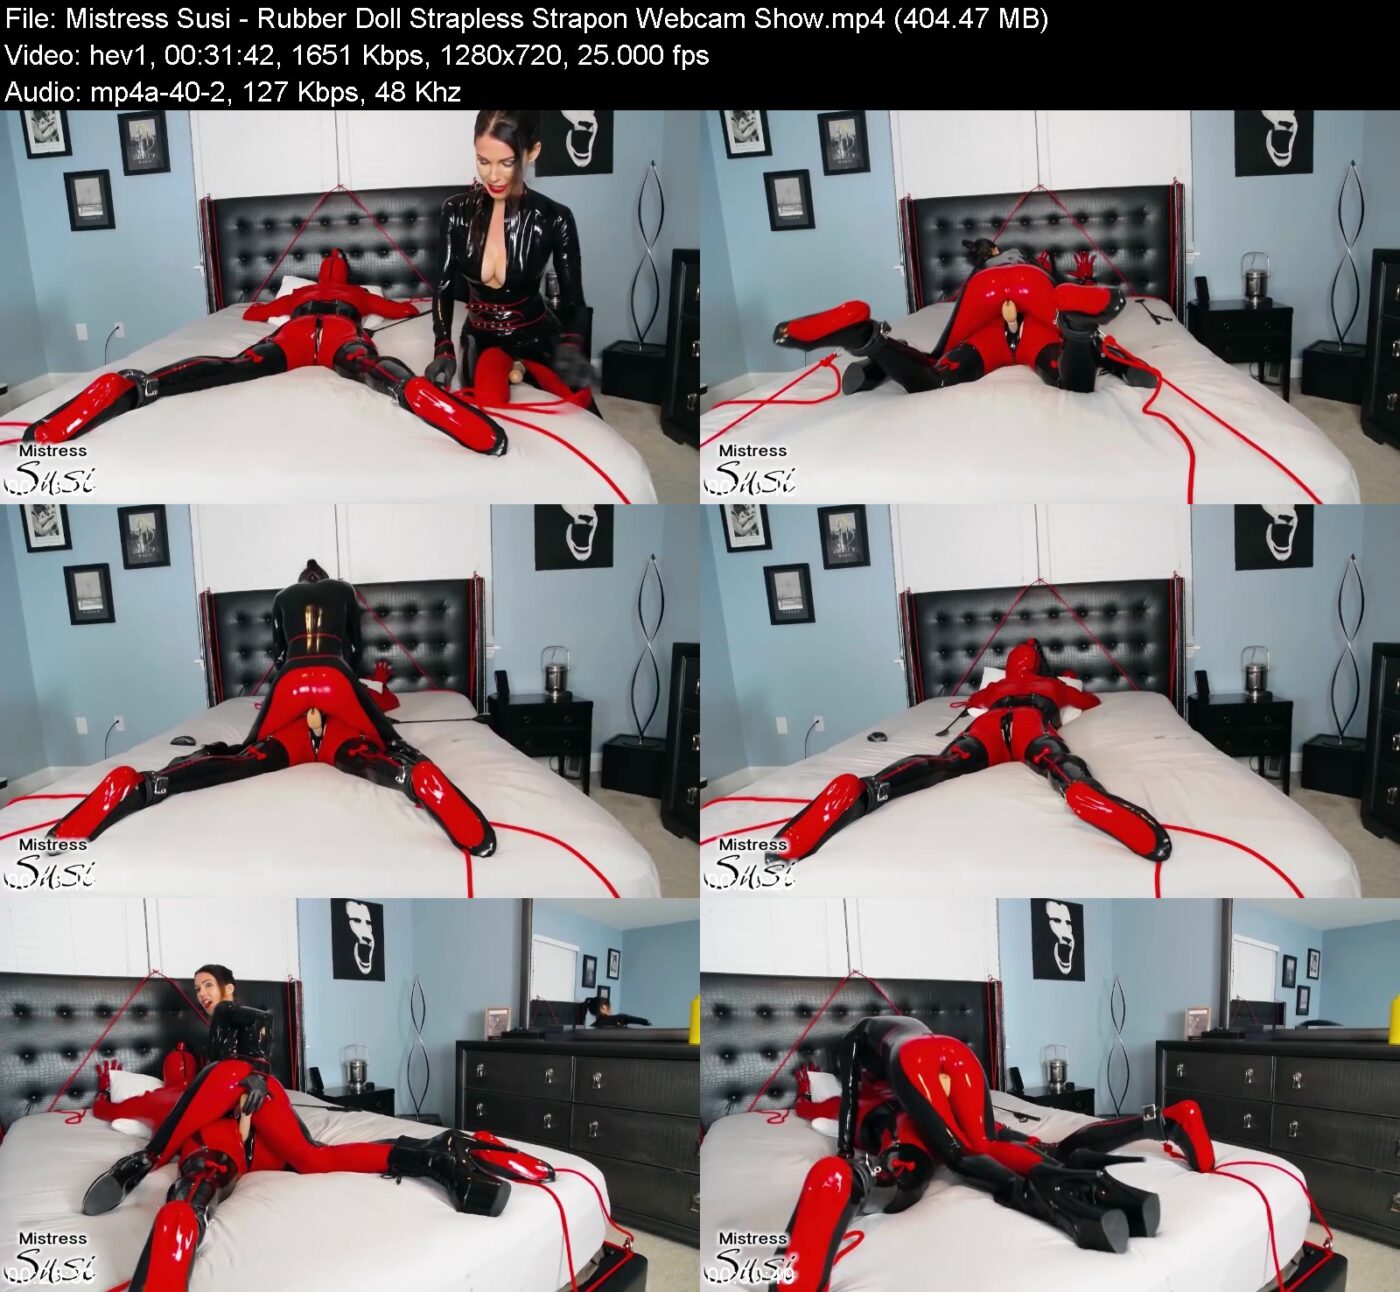 Mistress Susi in Rubber Doll Strapless Strapon Webcam Show